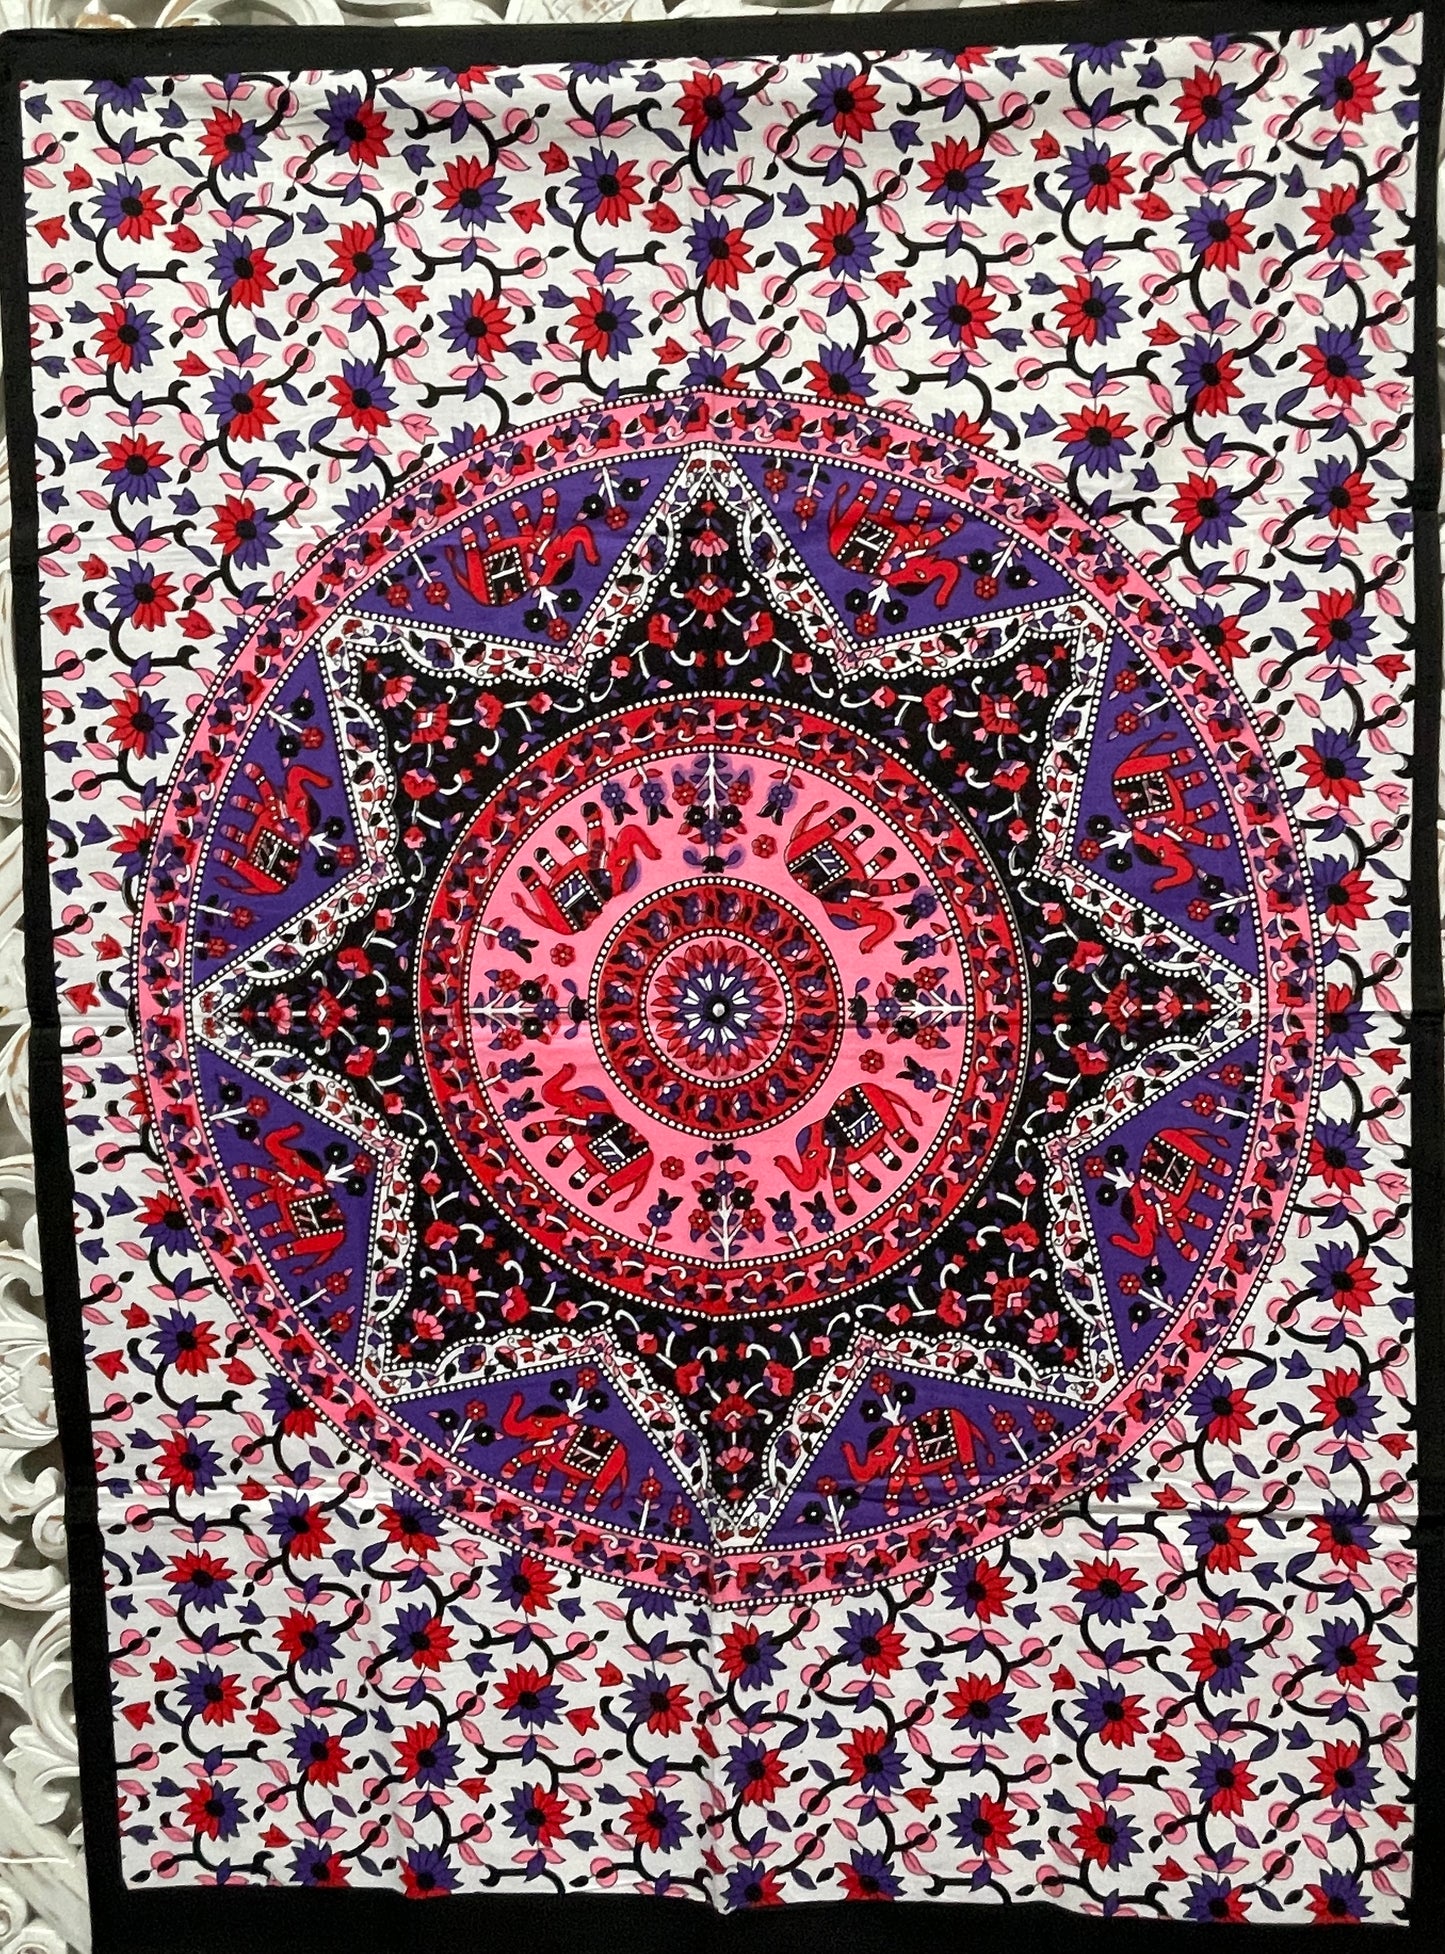 Hand printed Elephant Mandala Fabric Poster Tapestries- 4 Colors Available